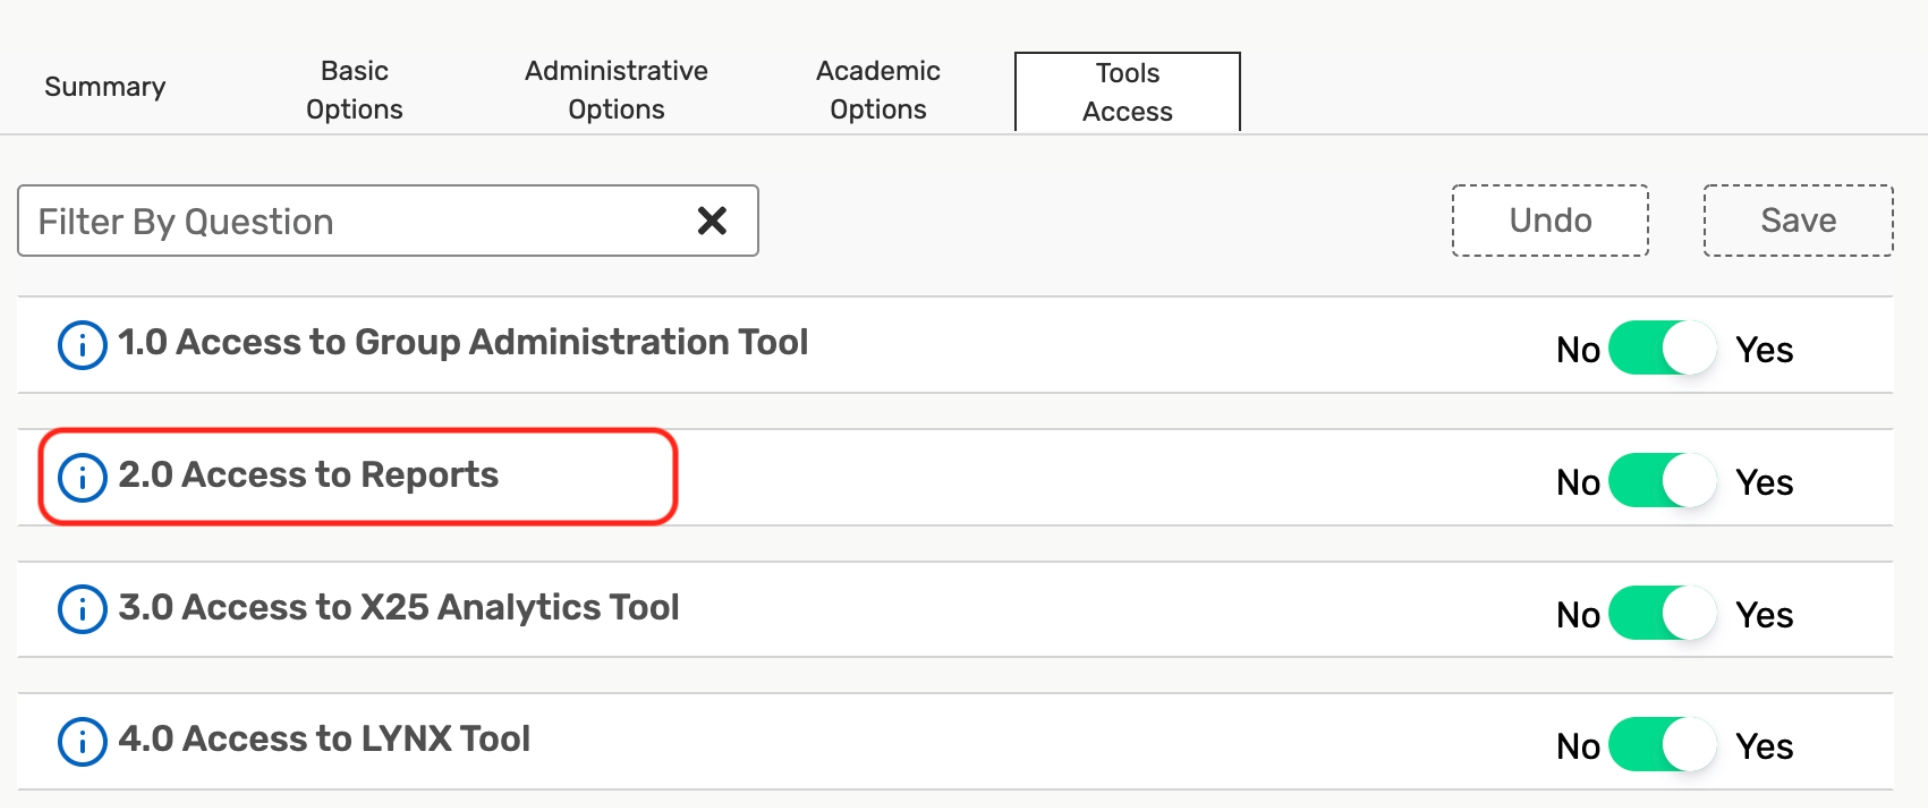 Configure access to reports under the Tools Access section of Settings.